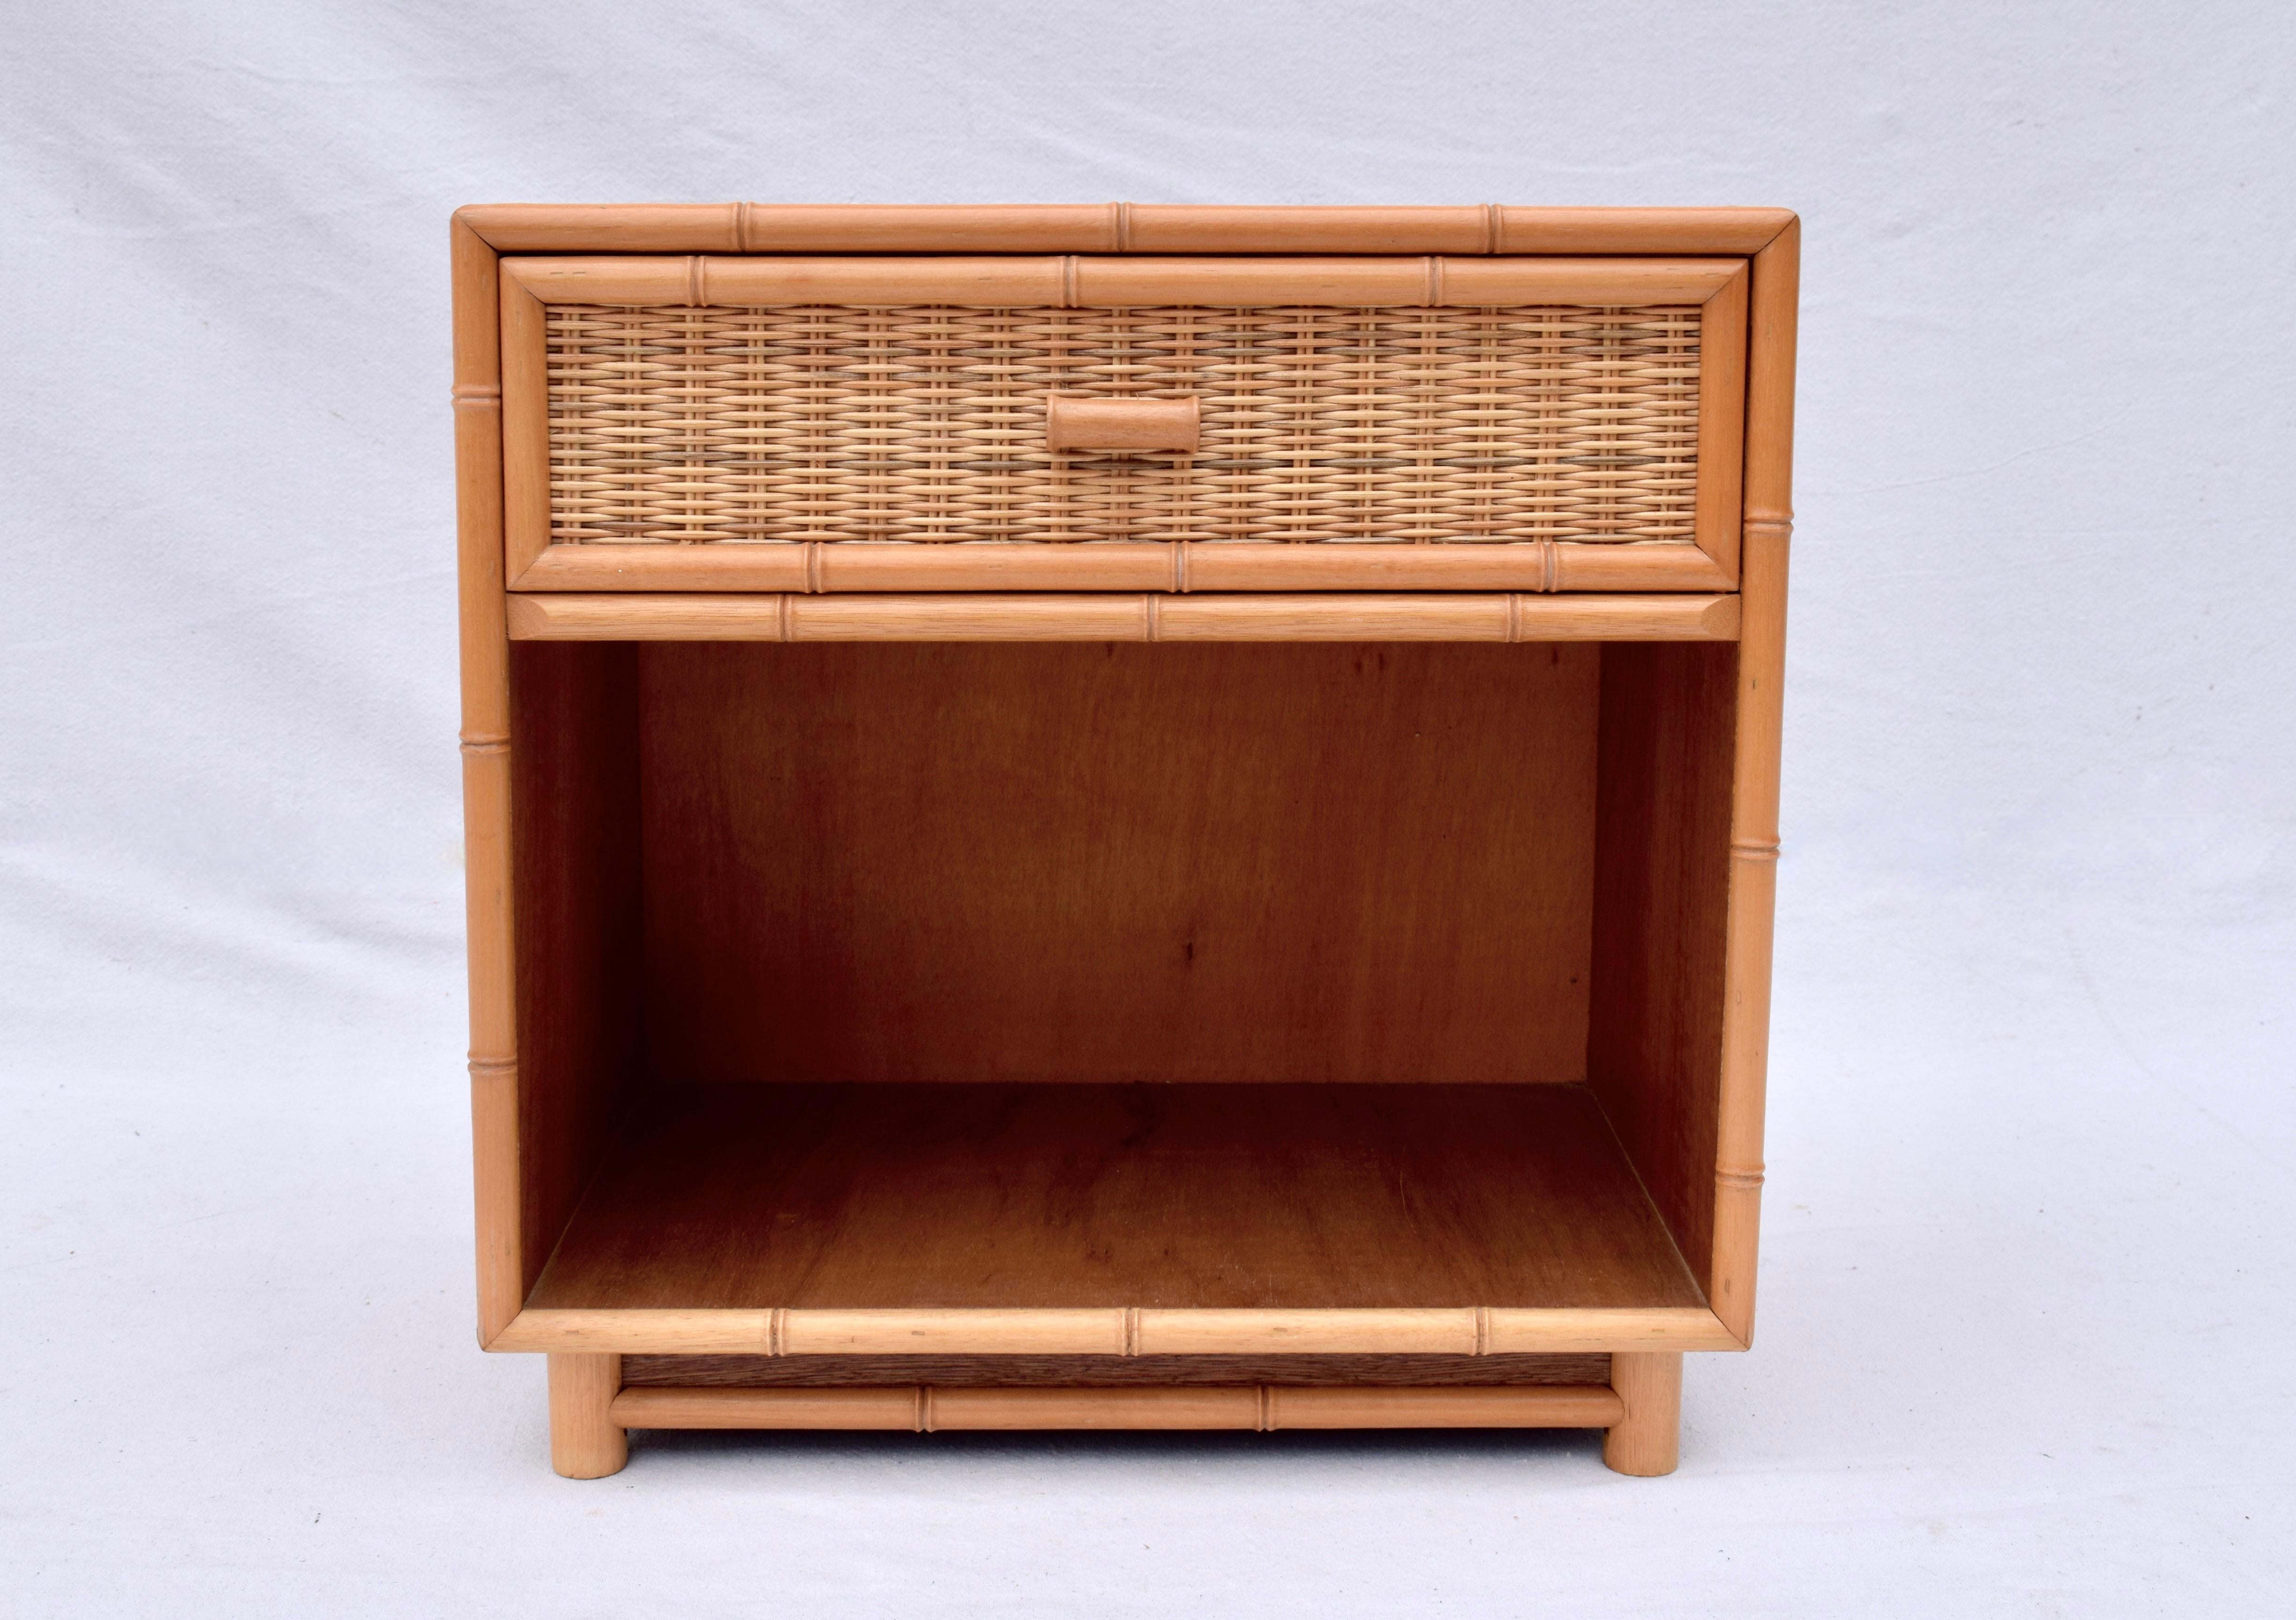 A vintage Coastal single drawer nightstand with shelf constructed of woven rattan panels, carved bamboo trim & custom glass top. A matching dresser can be viewed in our separate listing: 